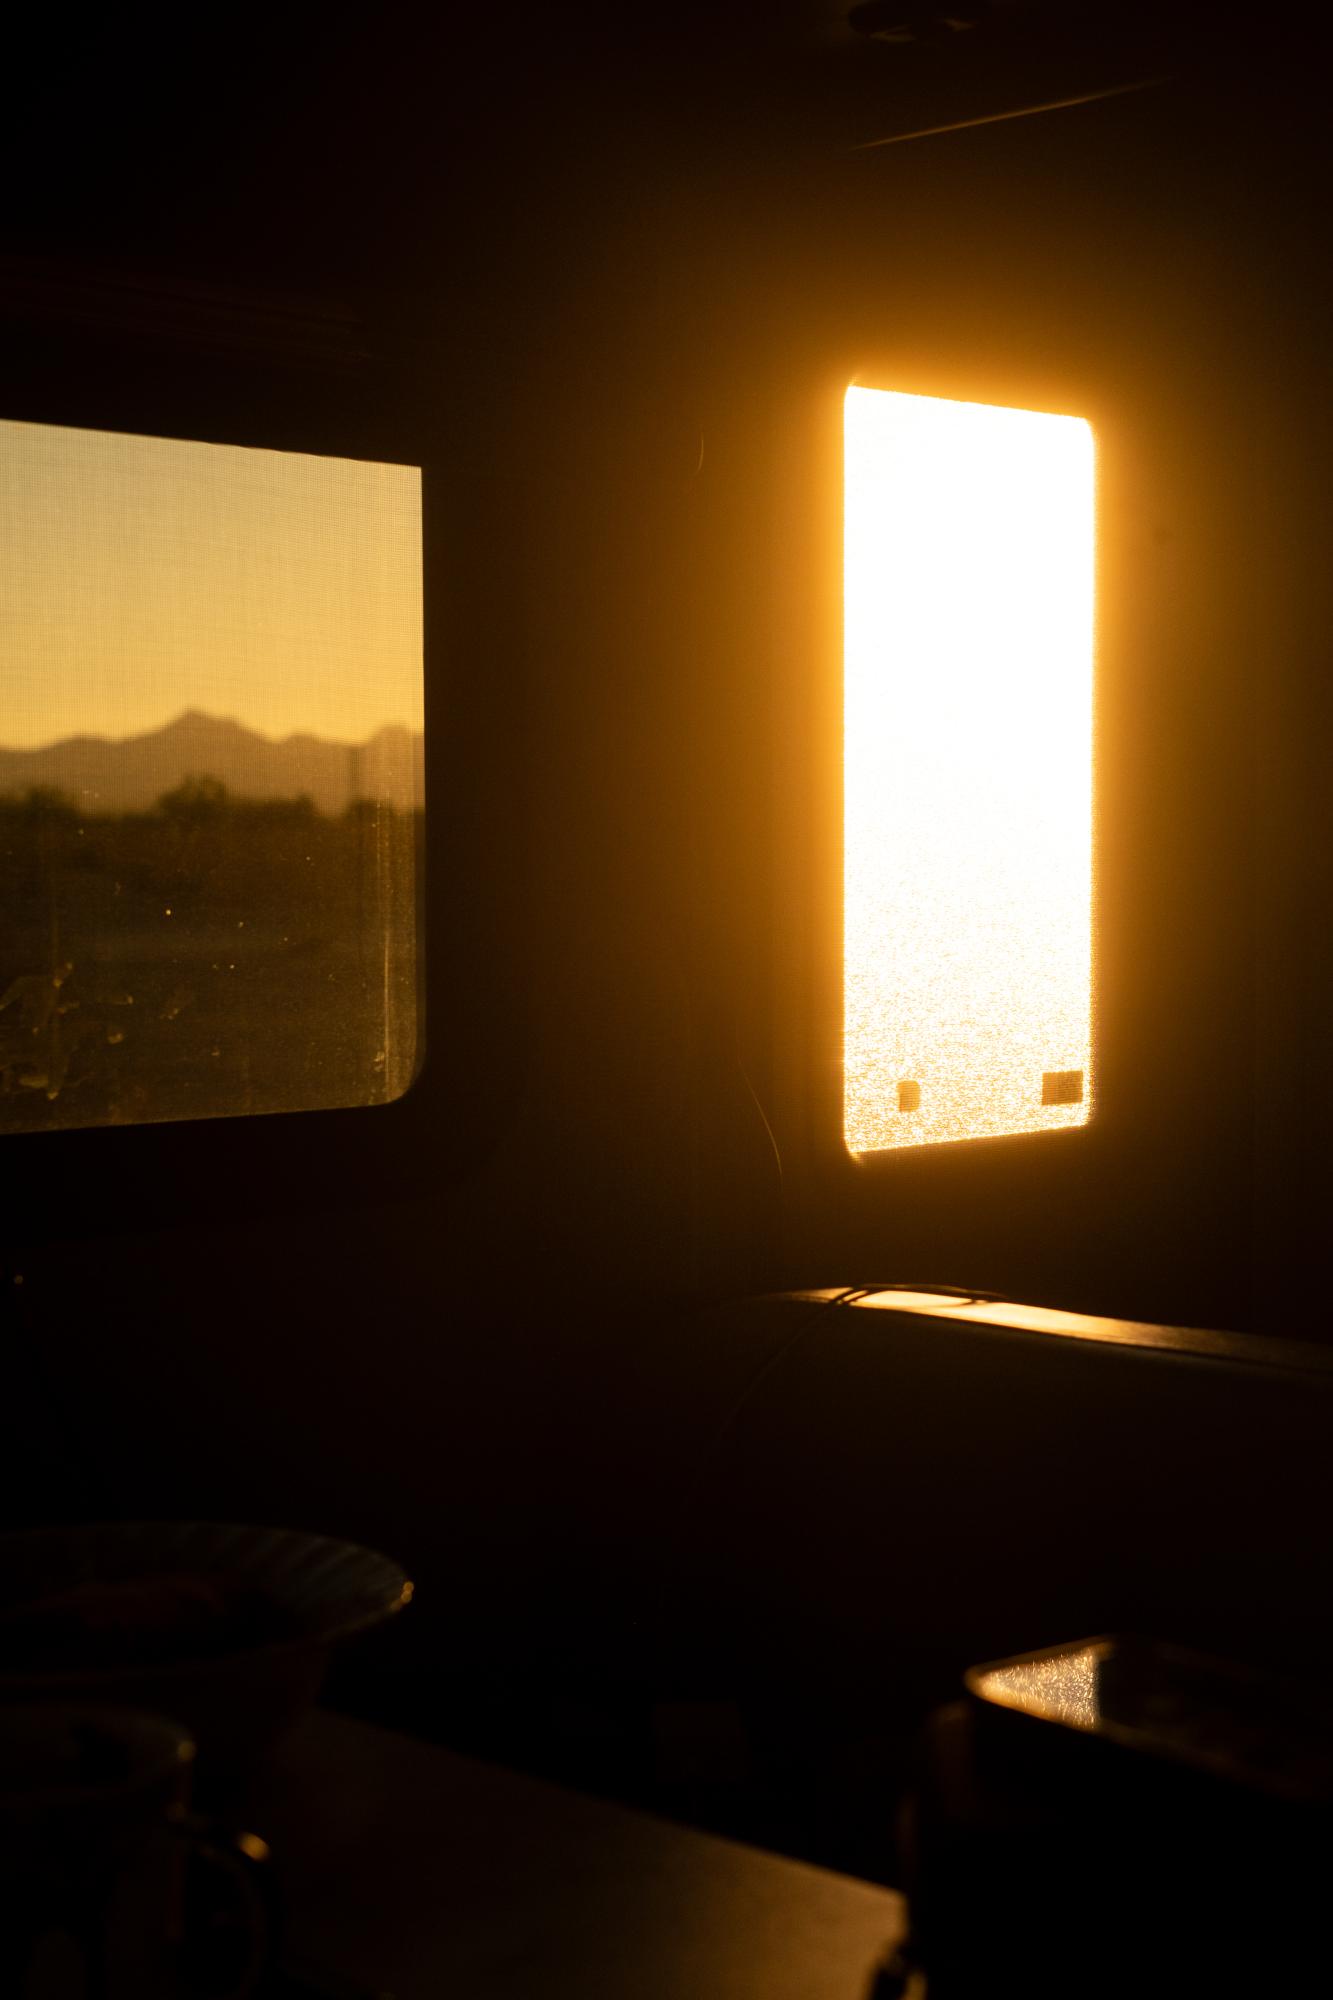 A Warm Winter (An Ongoing Journey) - Early morning light inside our rig. Quartzsite, Arizona.